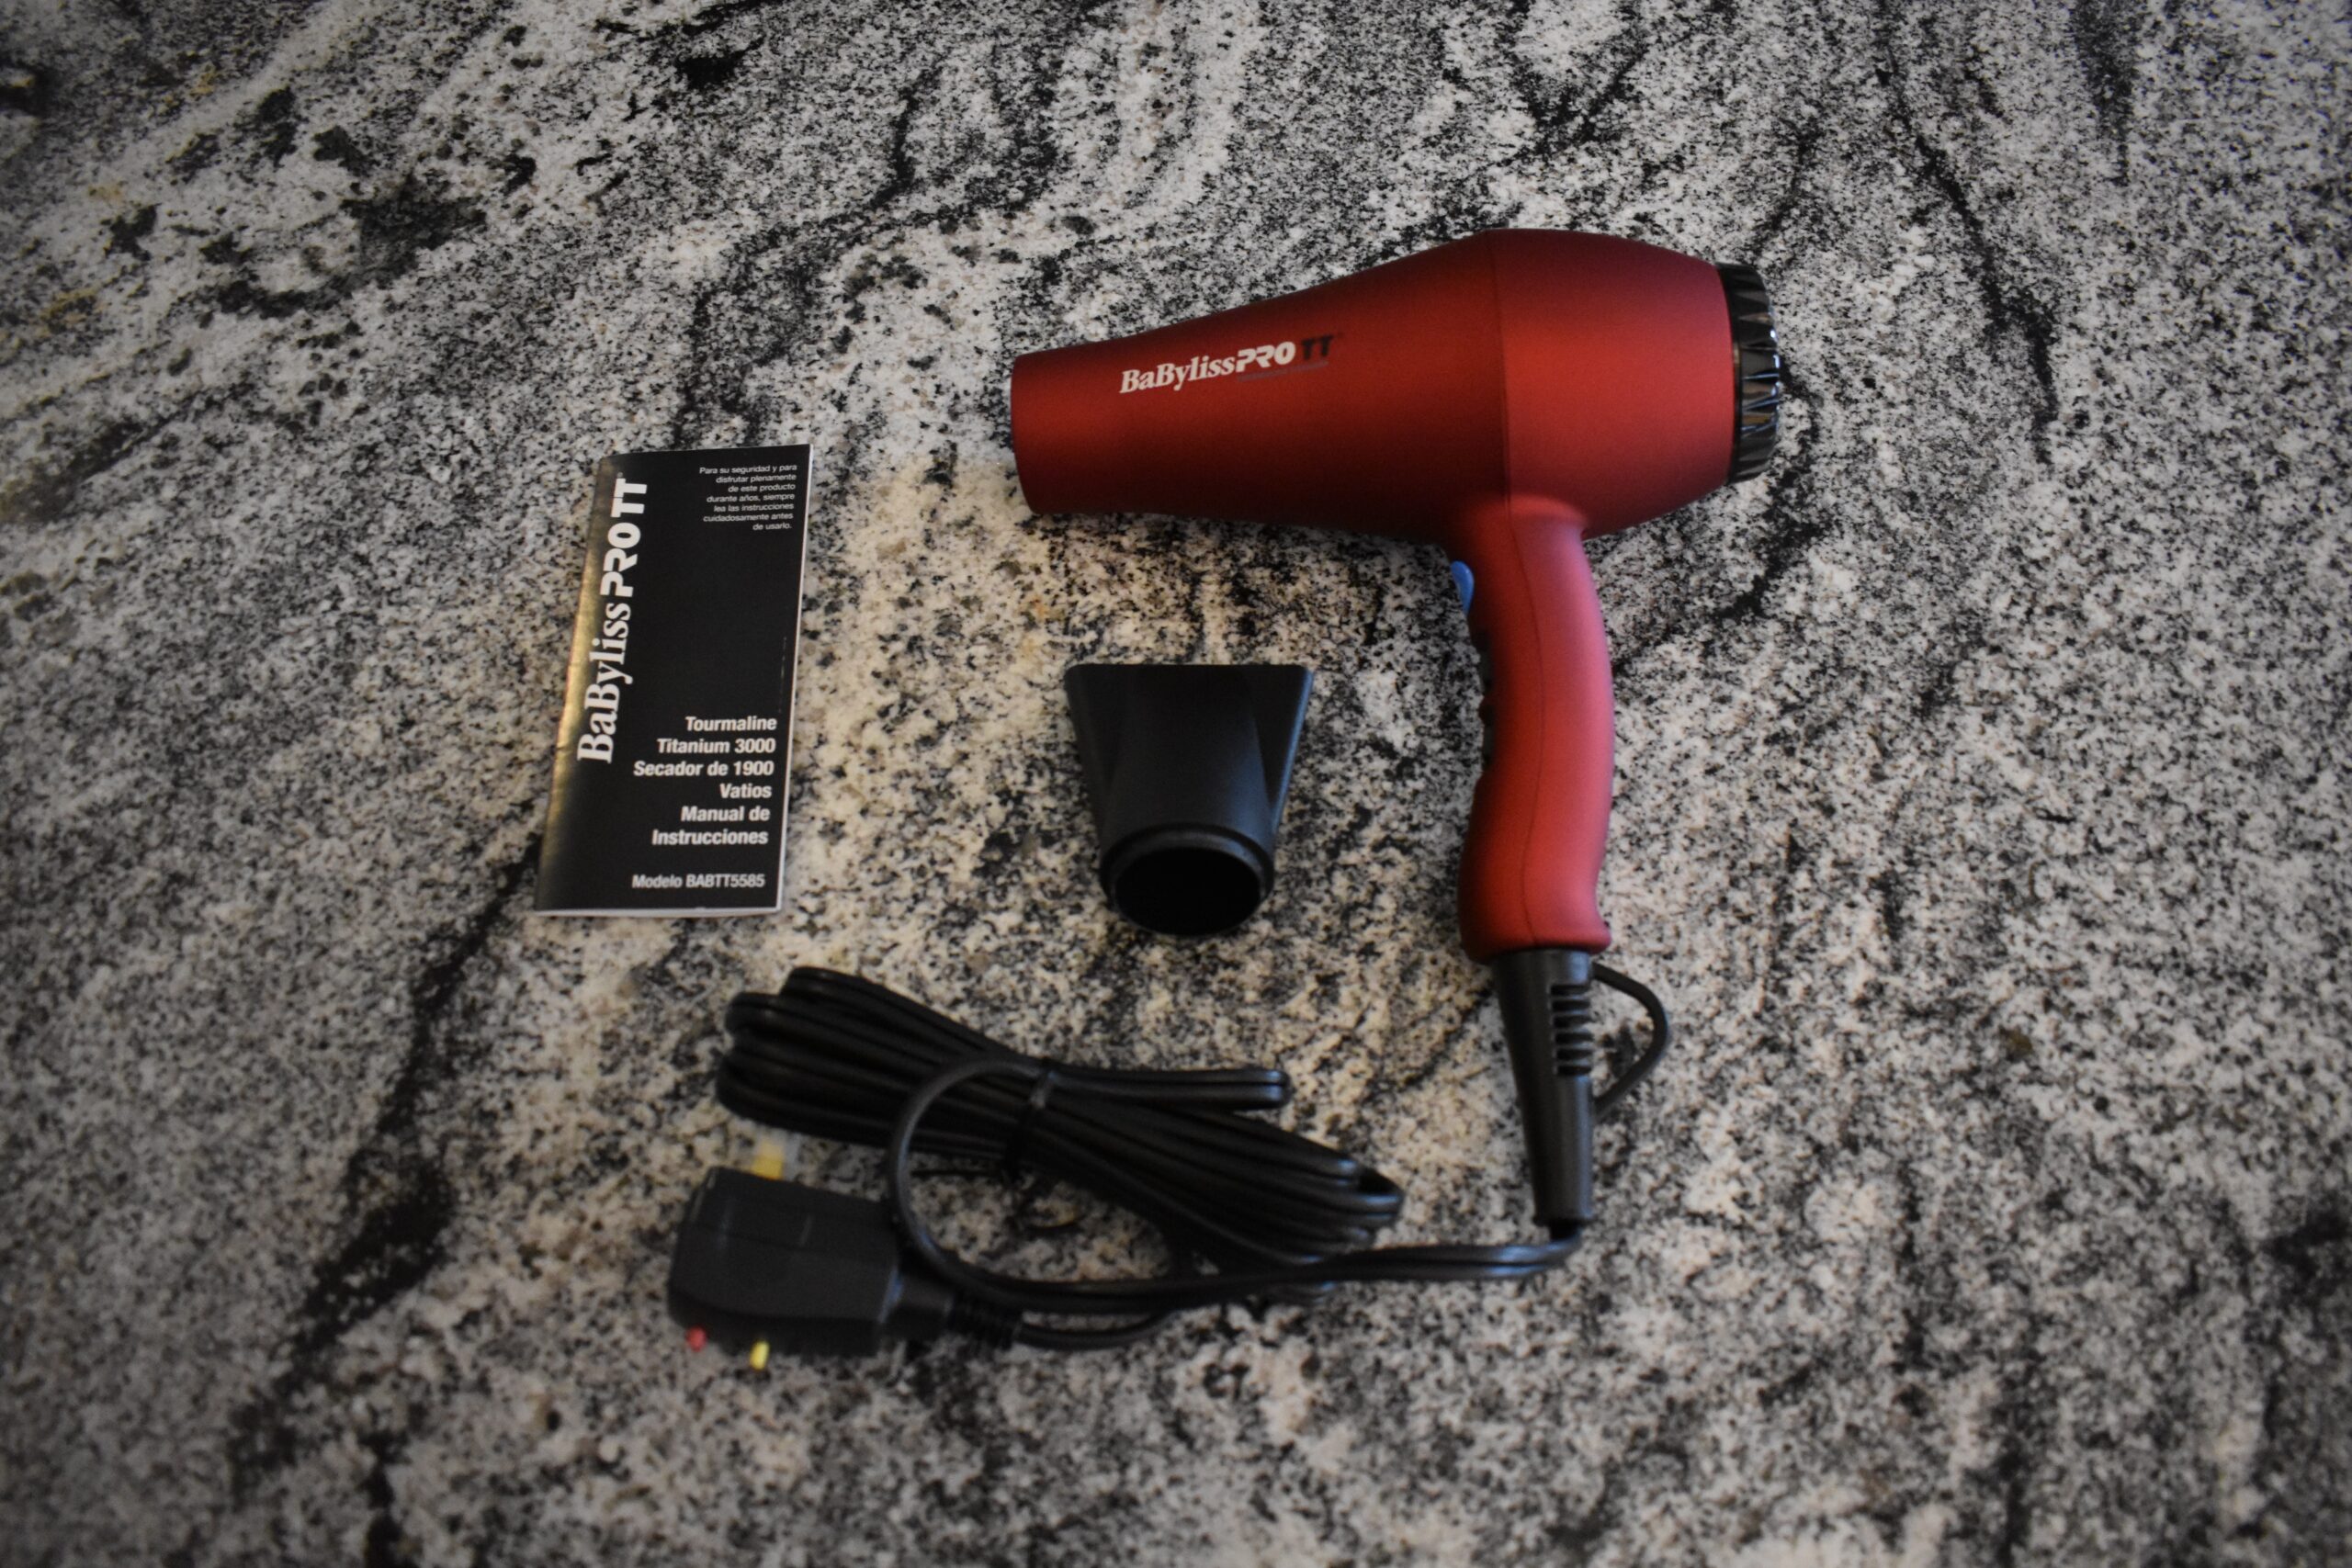 The complete contents of the Babyliss Pro TT box